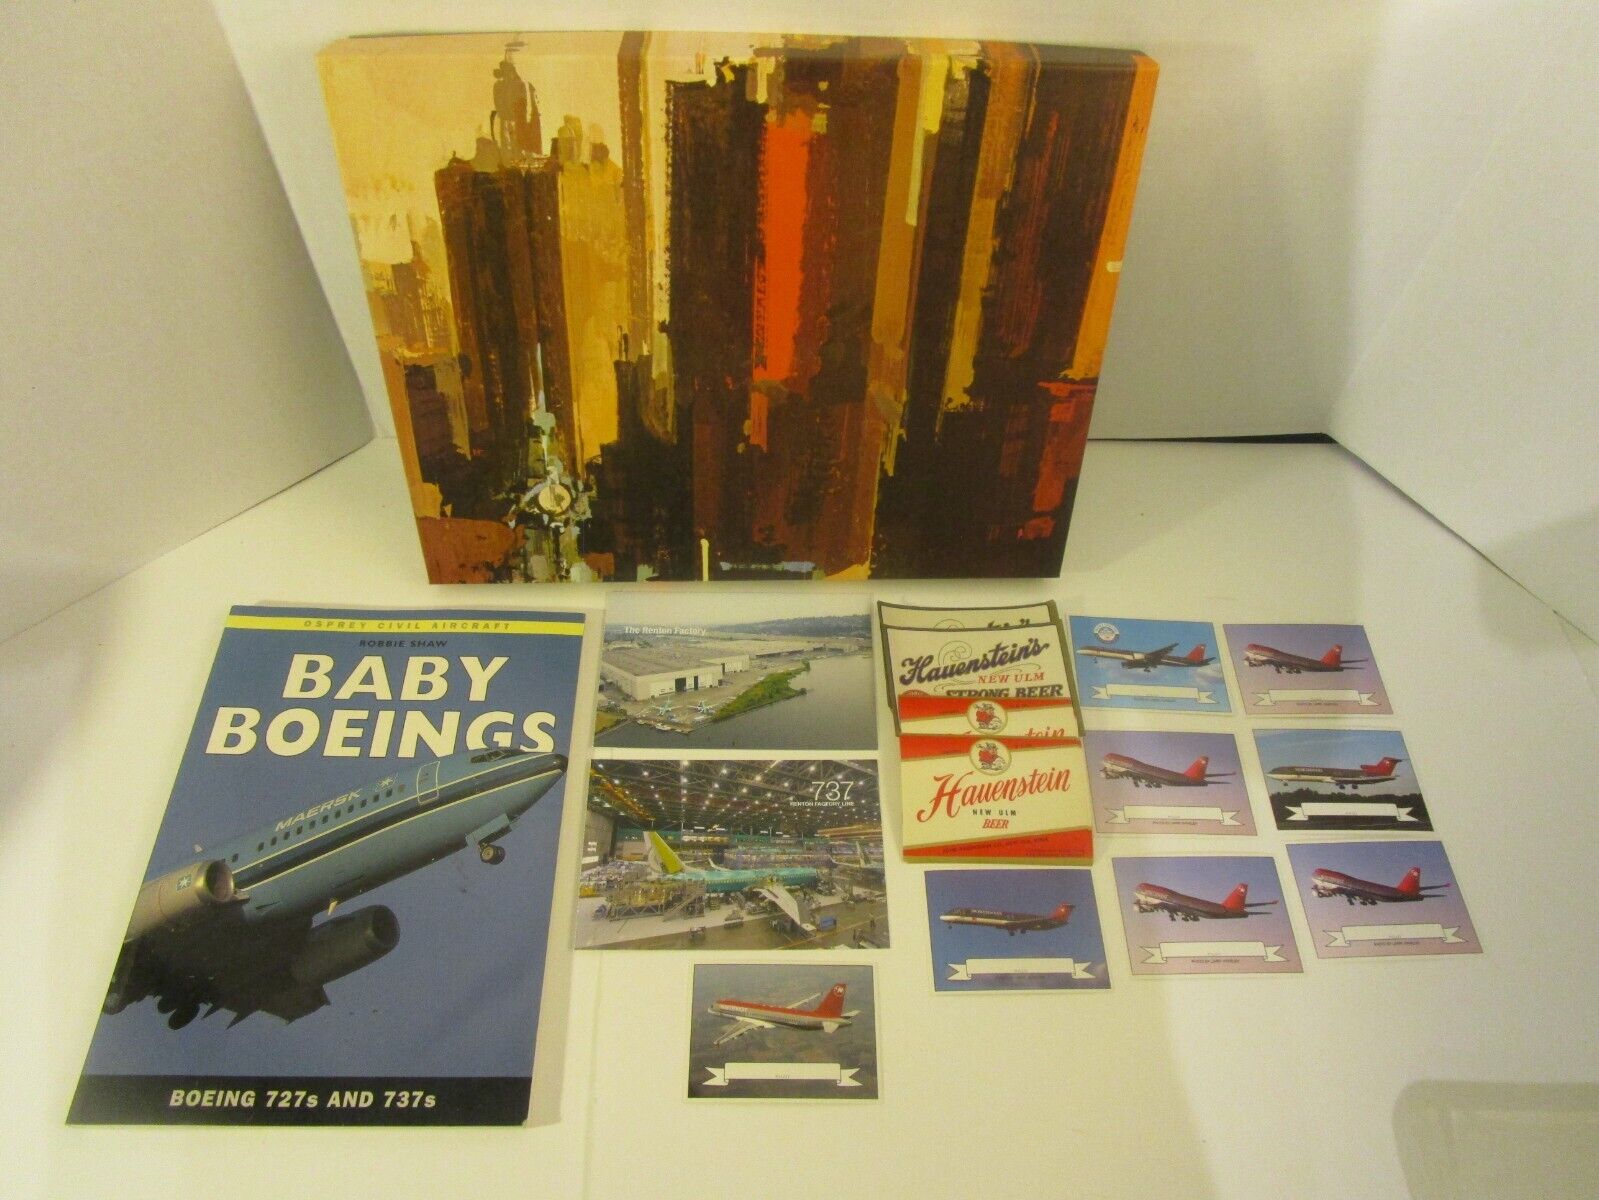 NORTHWEST AIRLINES PILOT LOT OF 8  +BOEING  PB BOOK+ CARDS + STAR WARS